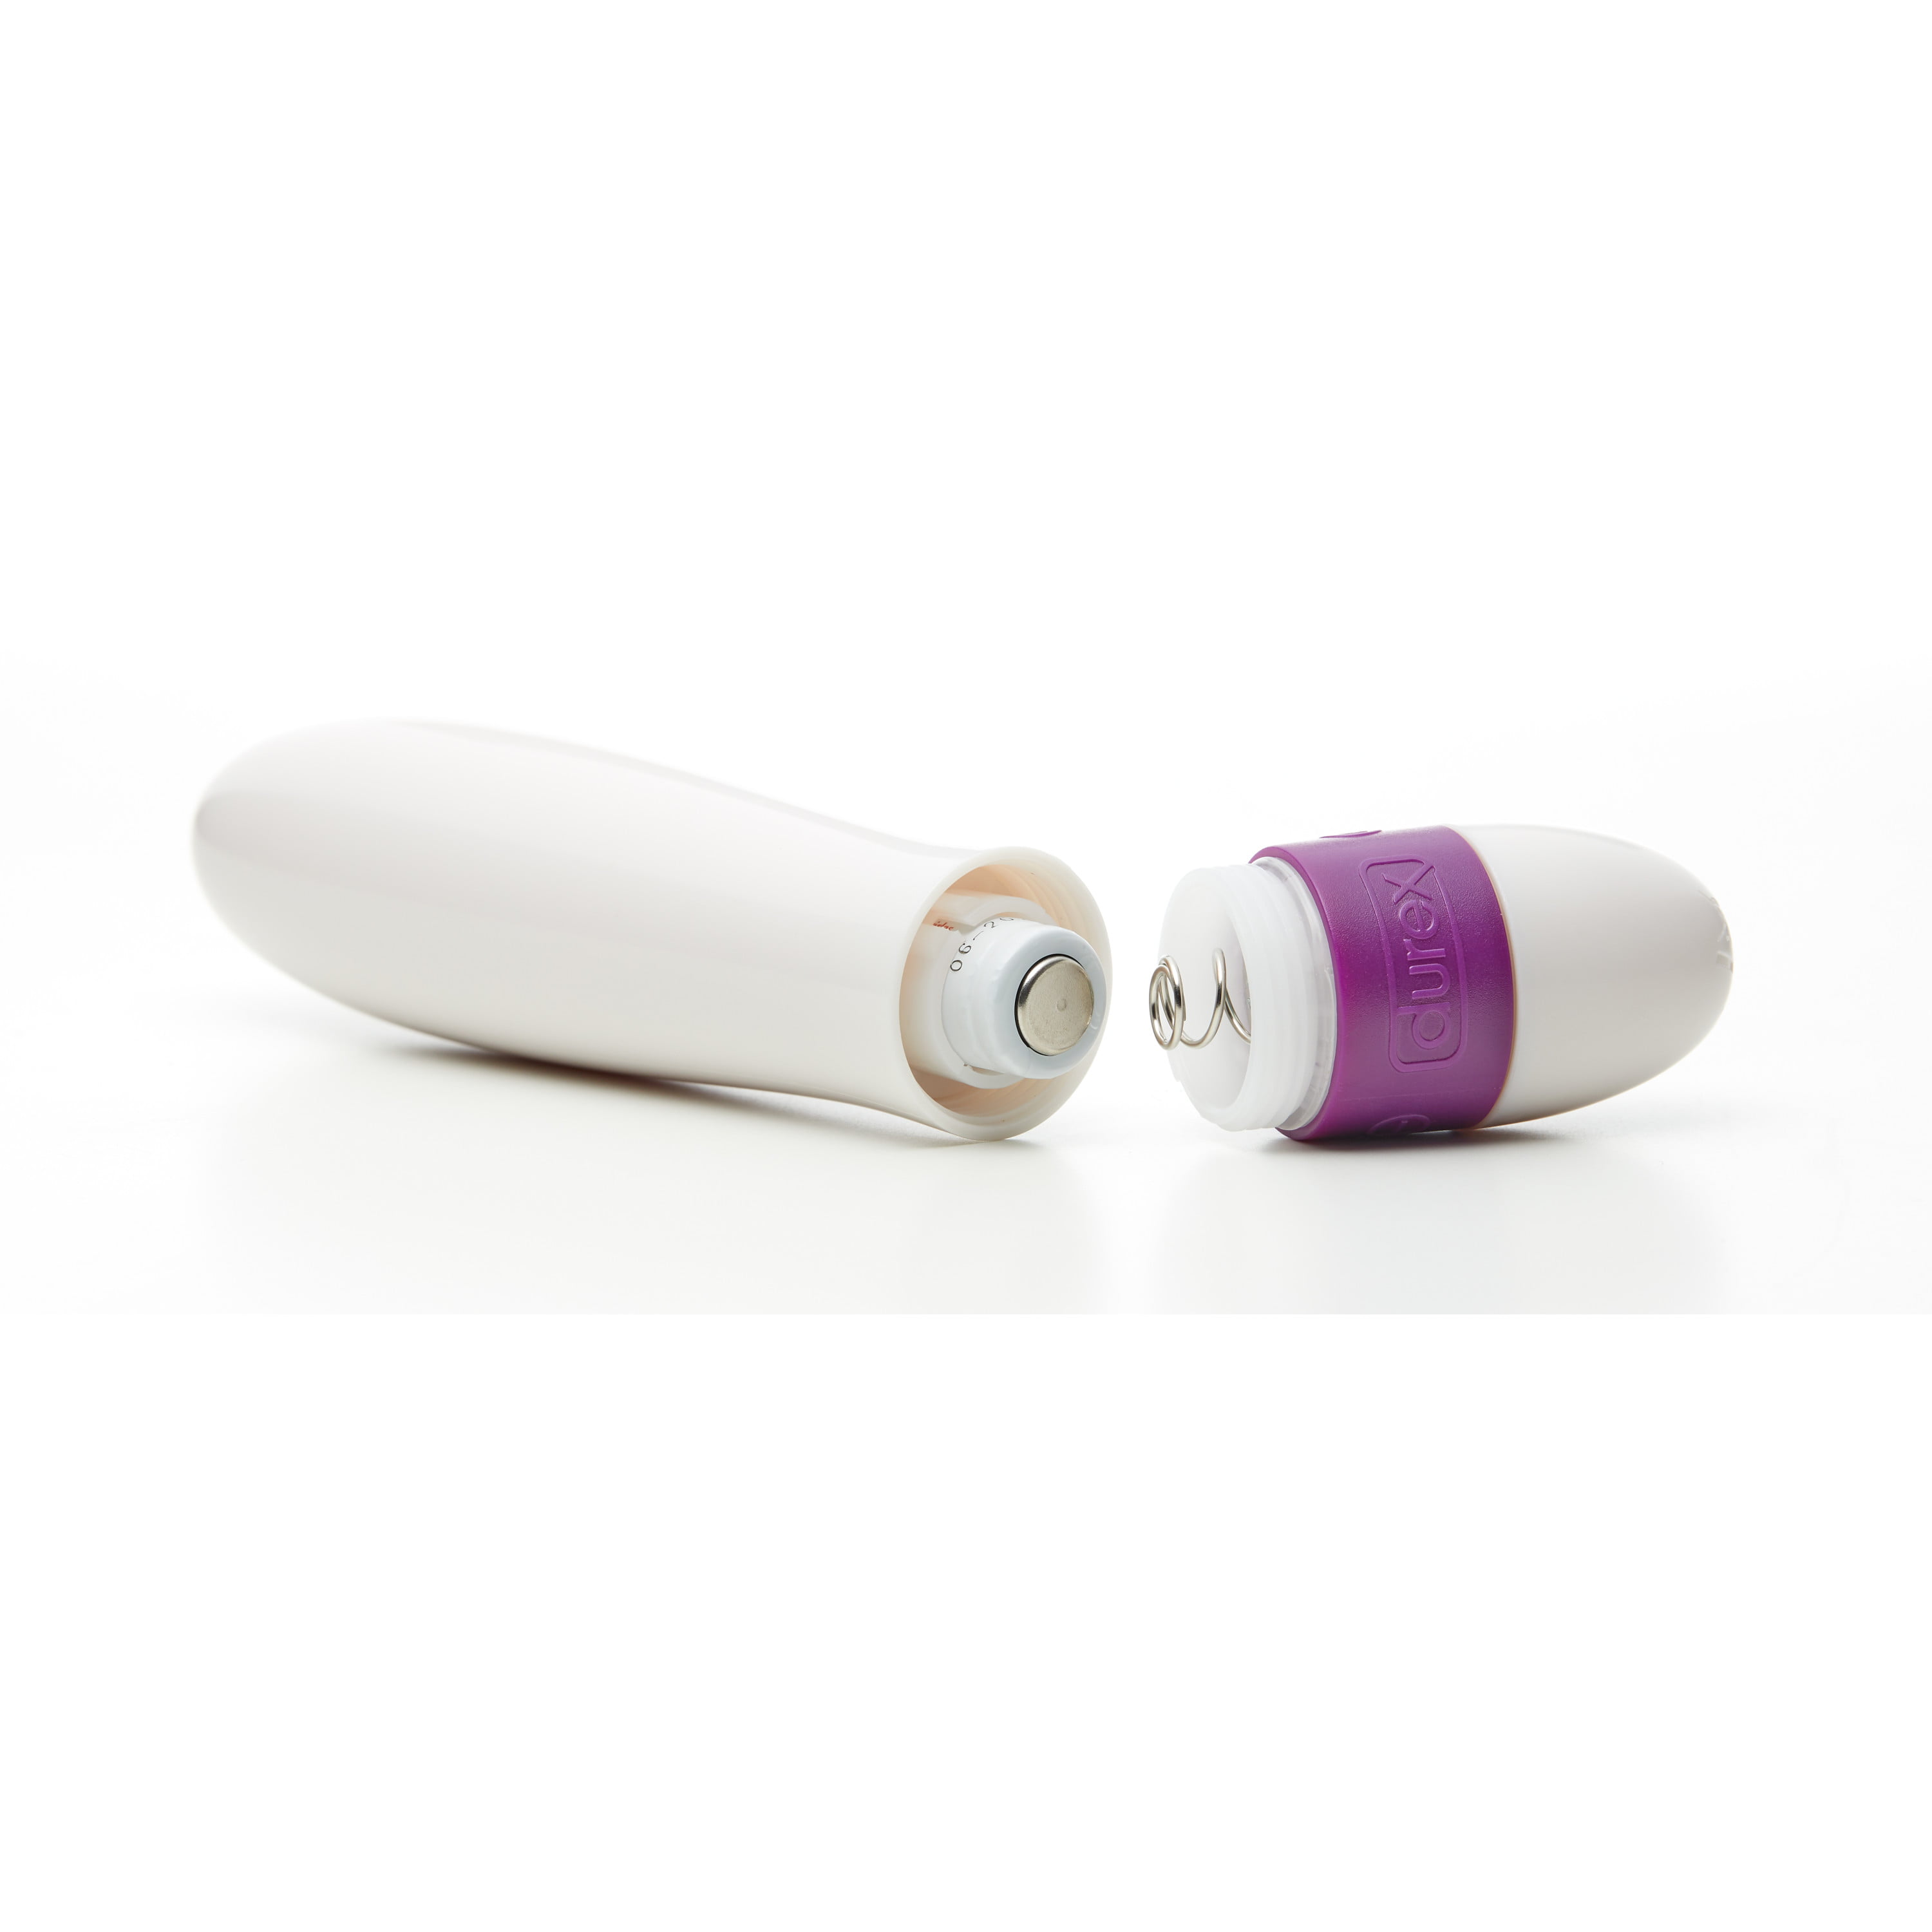 dan cantu recommends Play Allure Personal Massager